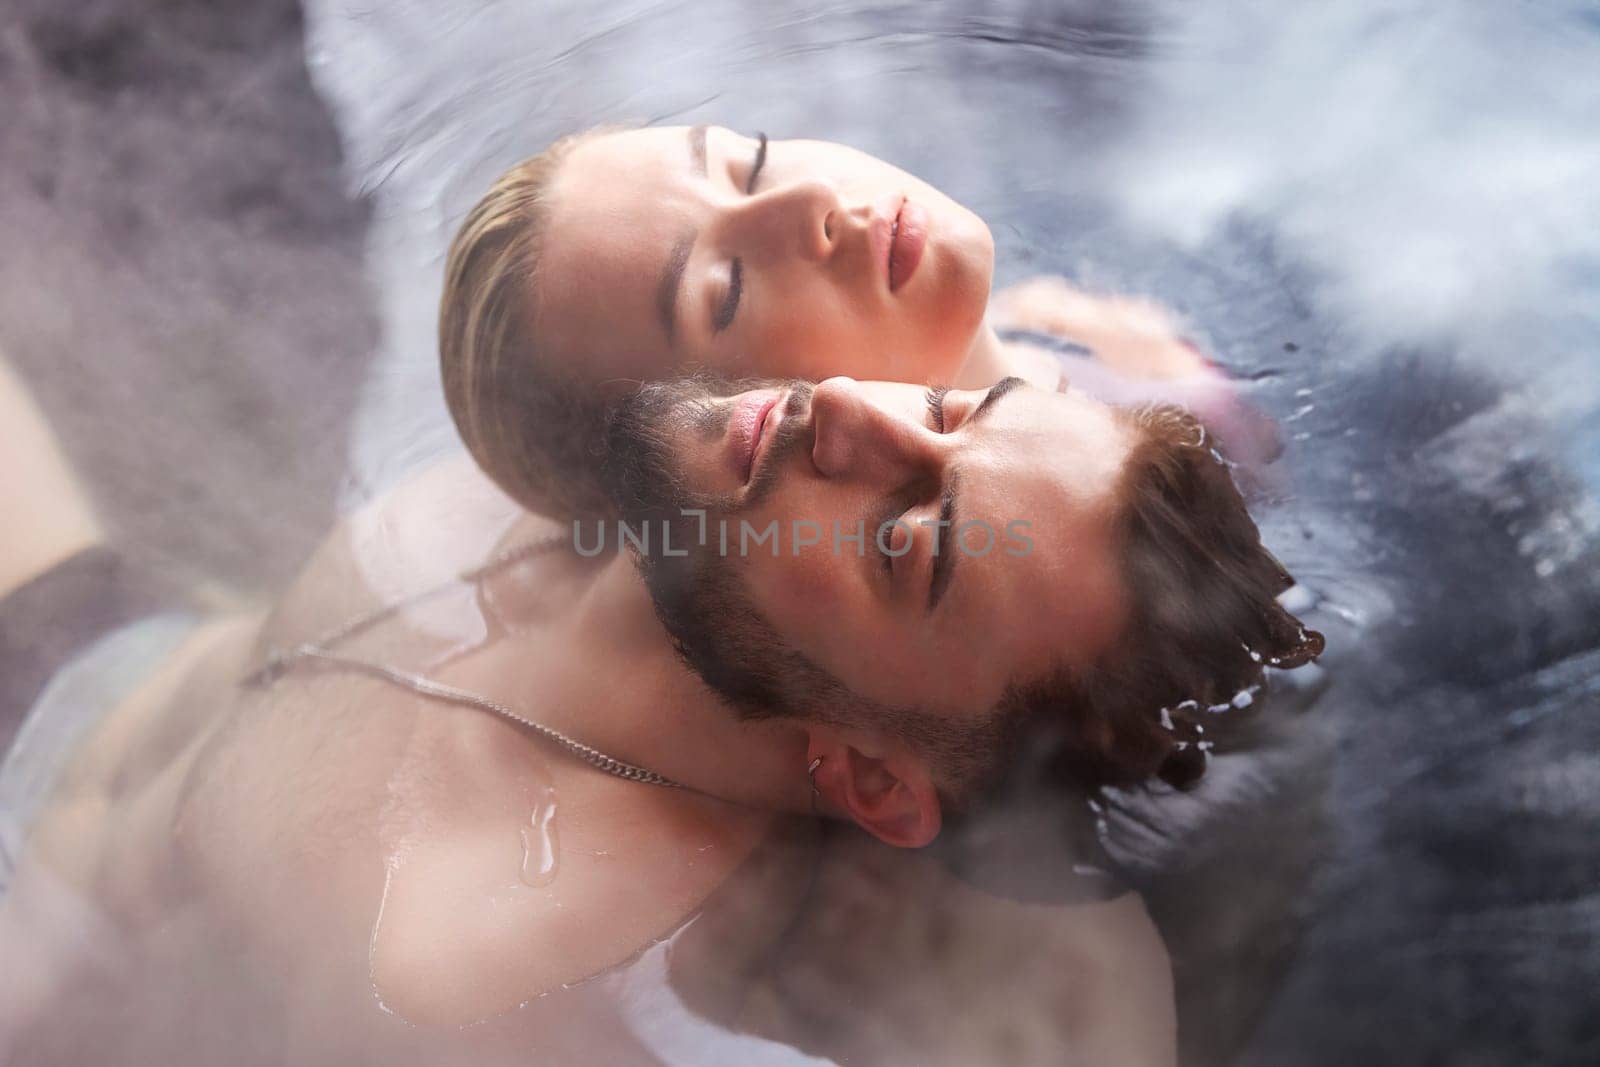 a young couple sits in a vat filled with water with their backs to each other